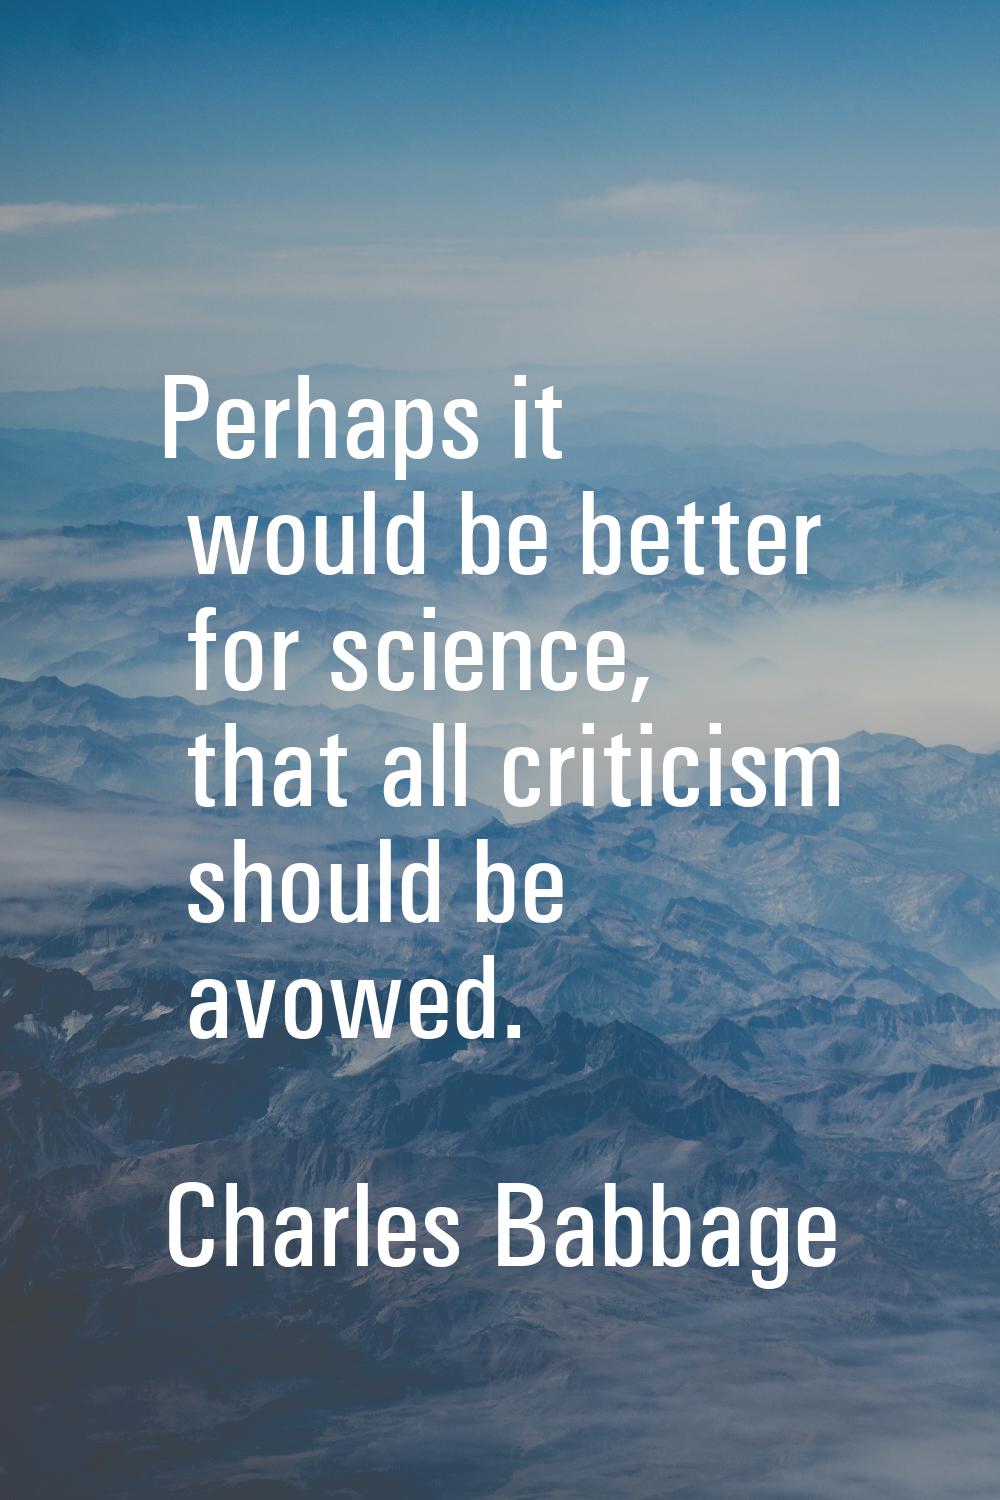 Perhaps it would be better for science, that all criticism should be avowed.